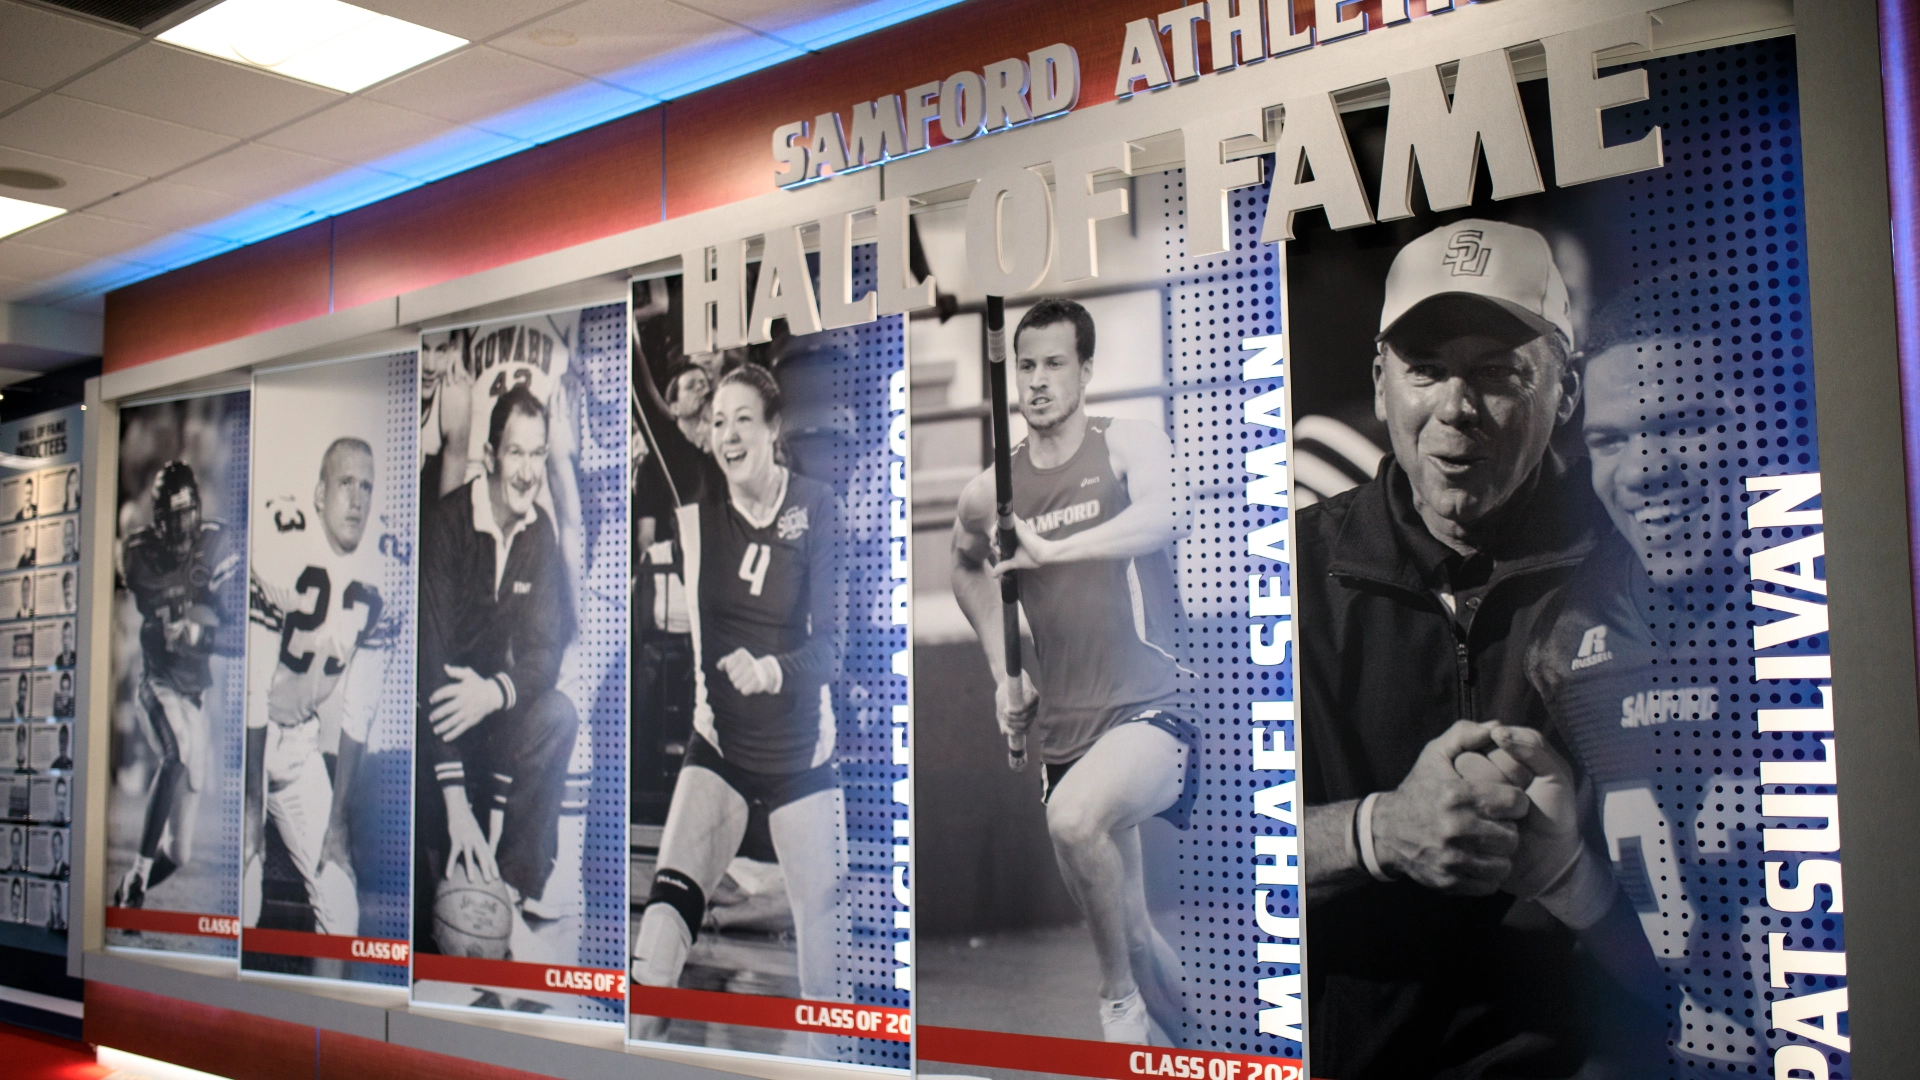 Athletics Hall of Fame banner SD09201970